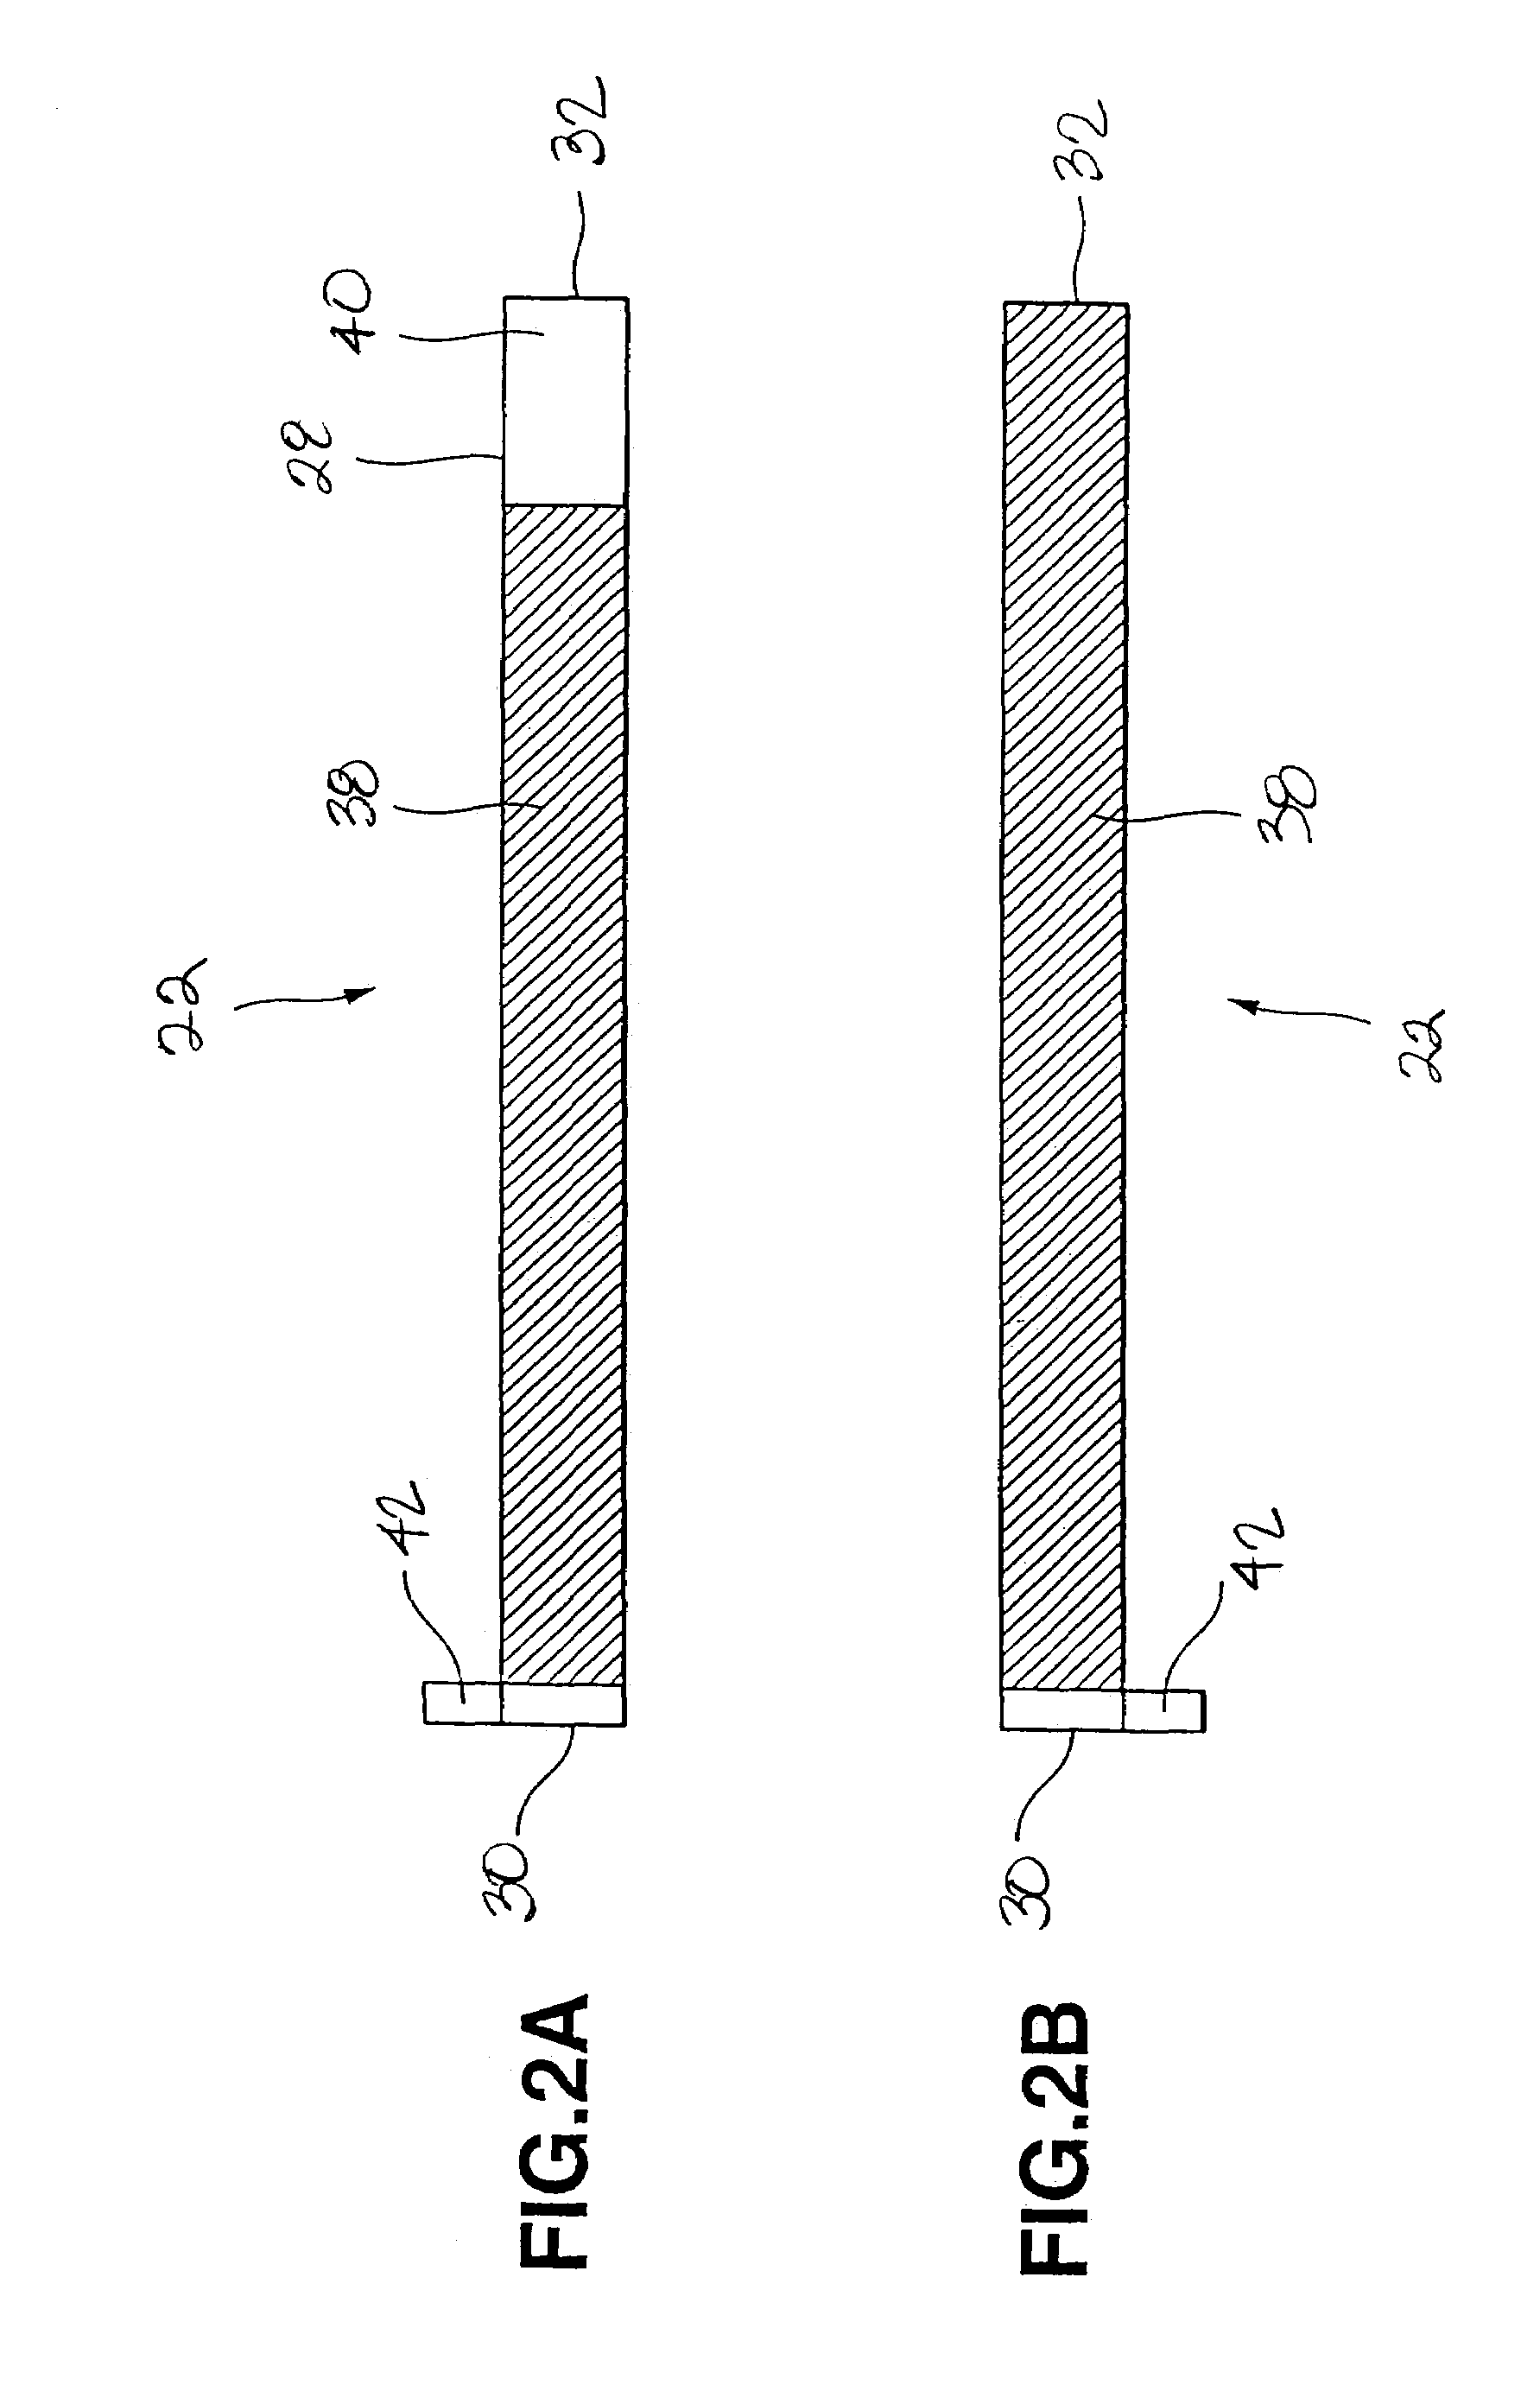 Non-aqueous electrolyte cell and solid electrolyte cell